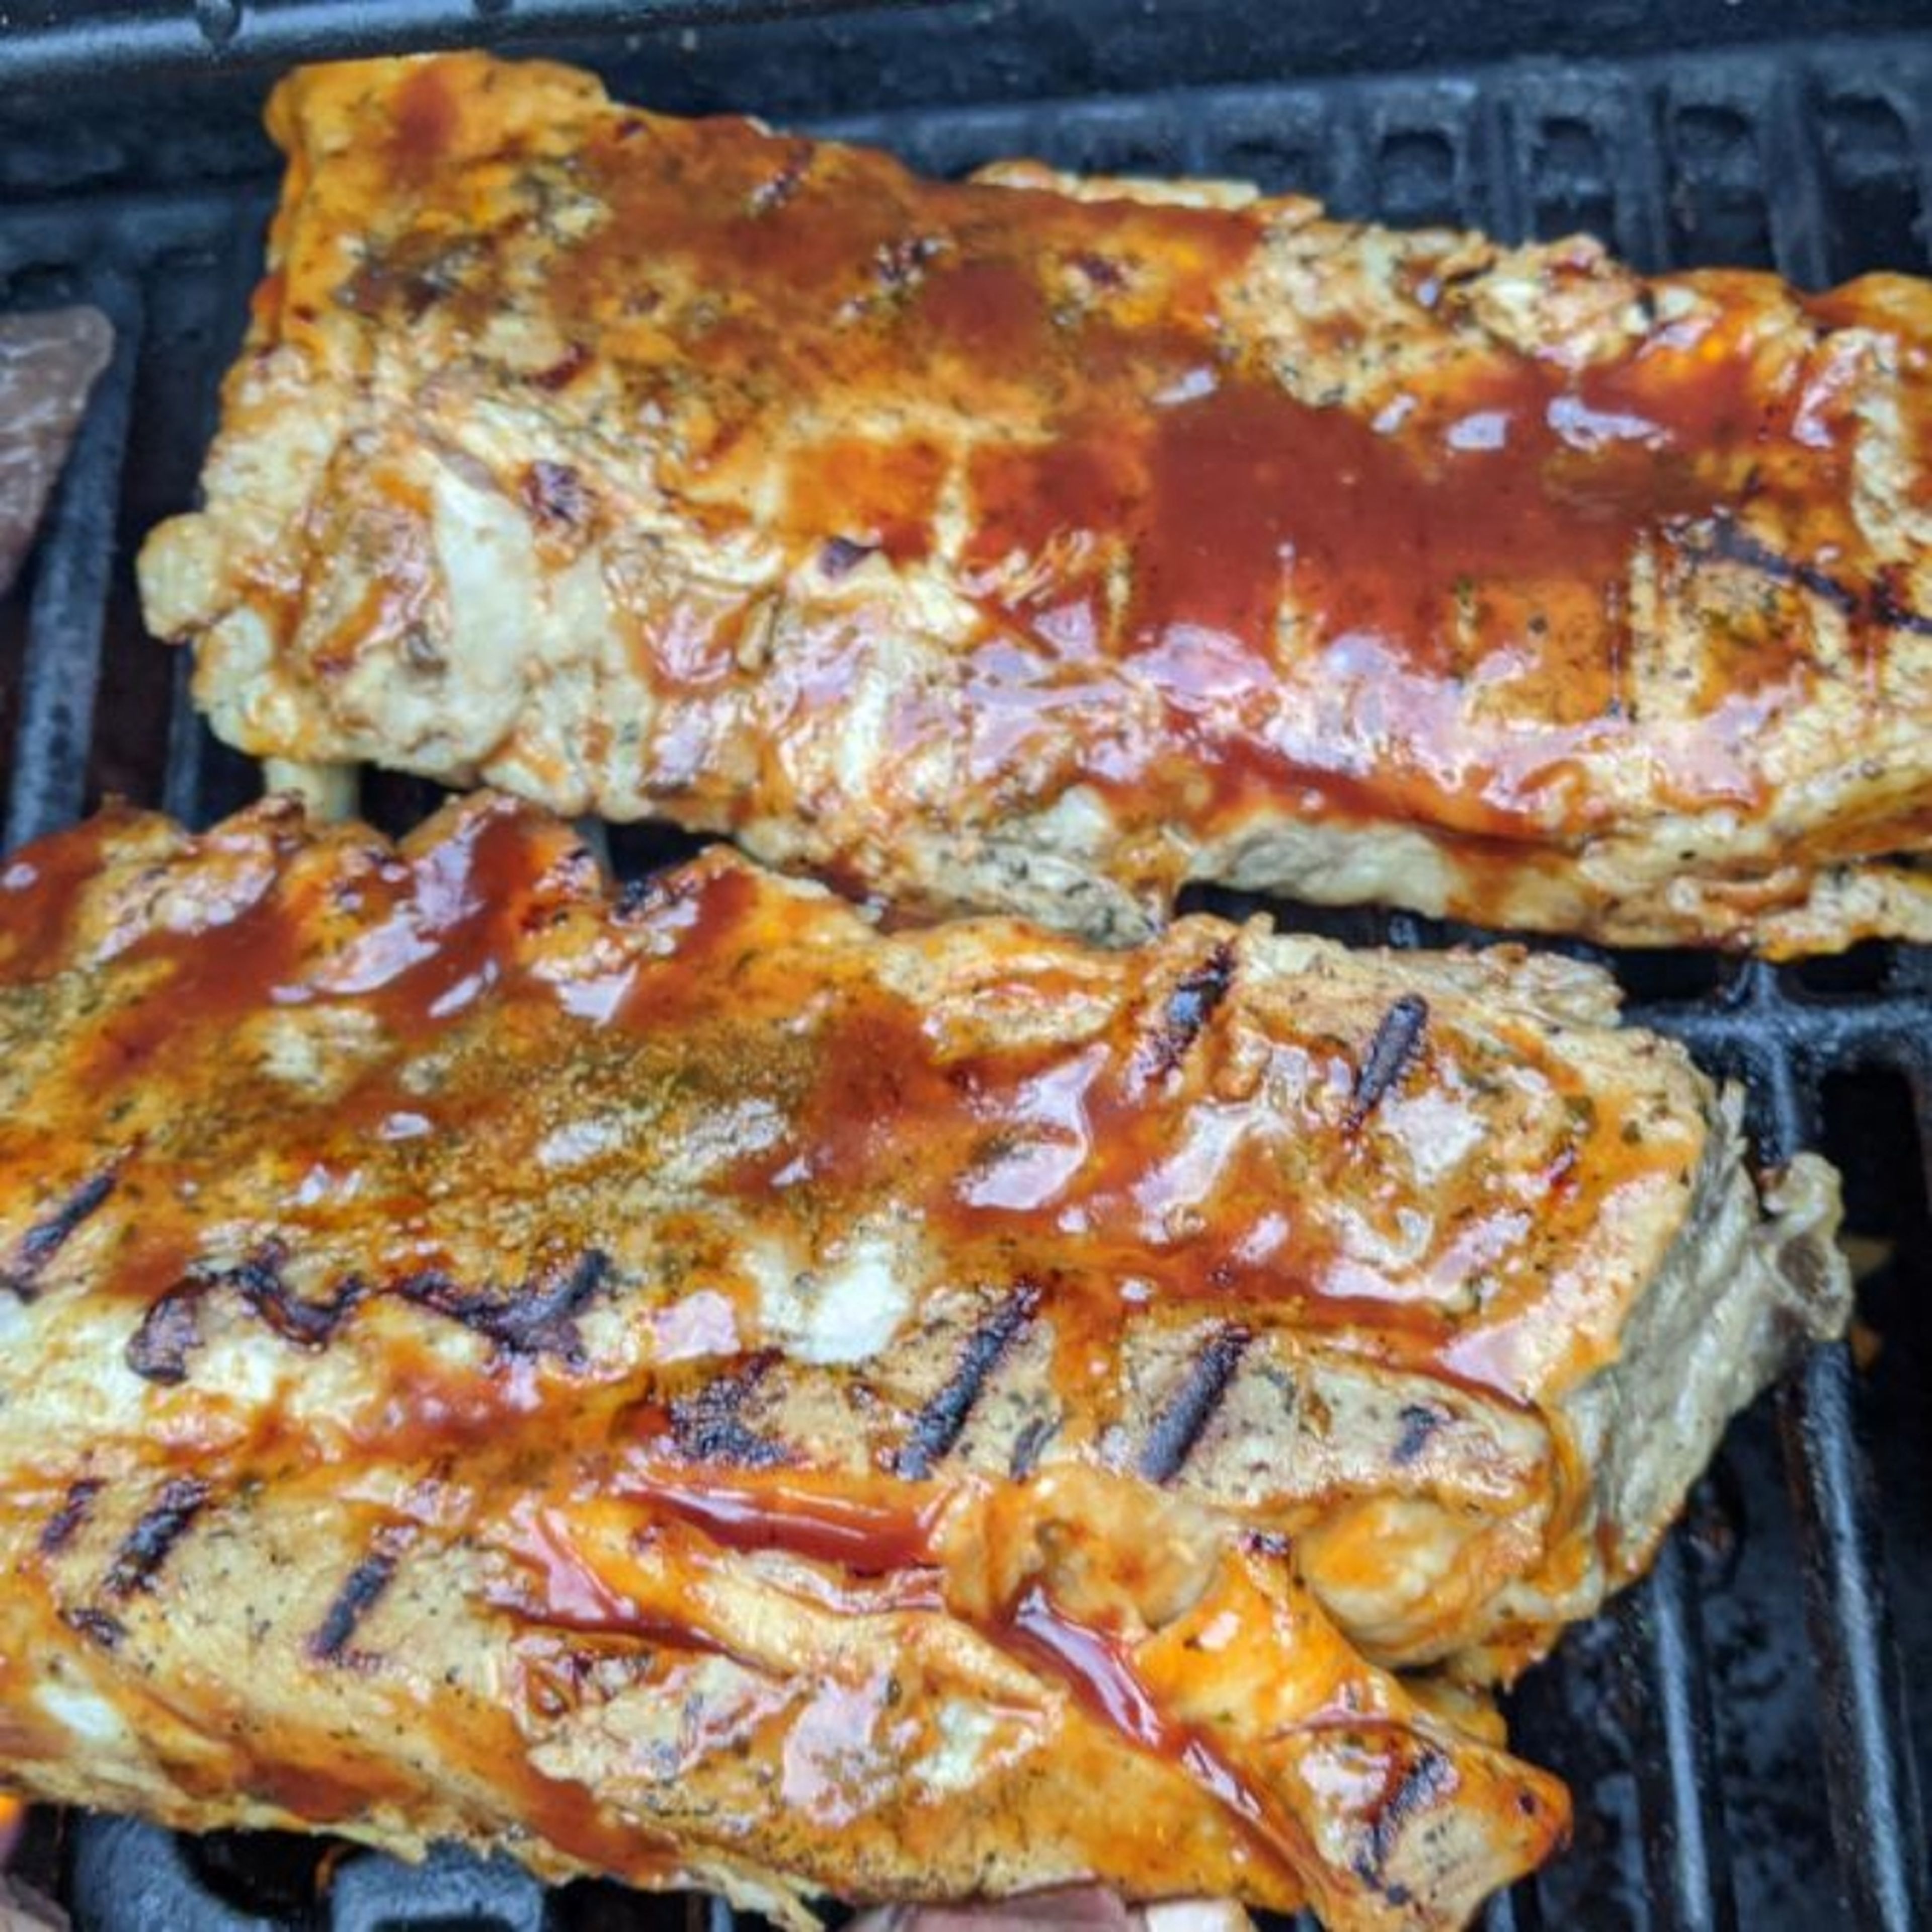 This step can be done in the oven see or next day, or you can take the cooled down ribs from the over to a cottage and put it on a BBQ. All you need to do is brush BBQ sauce on both sides and put it on BBQ or broil it in the oven for 5 minutes.